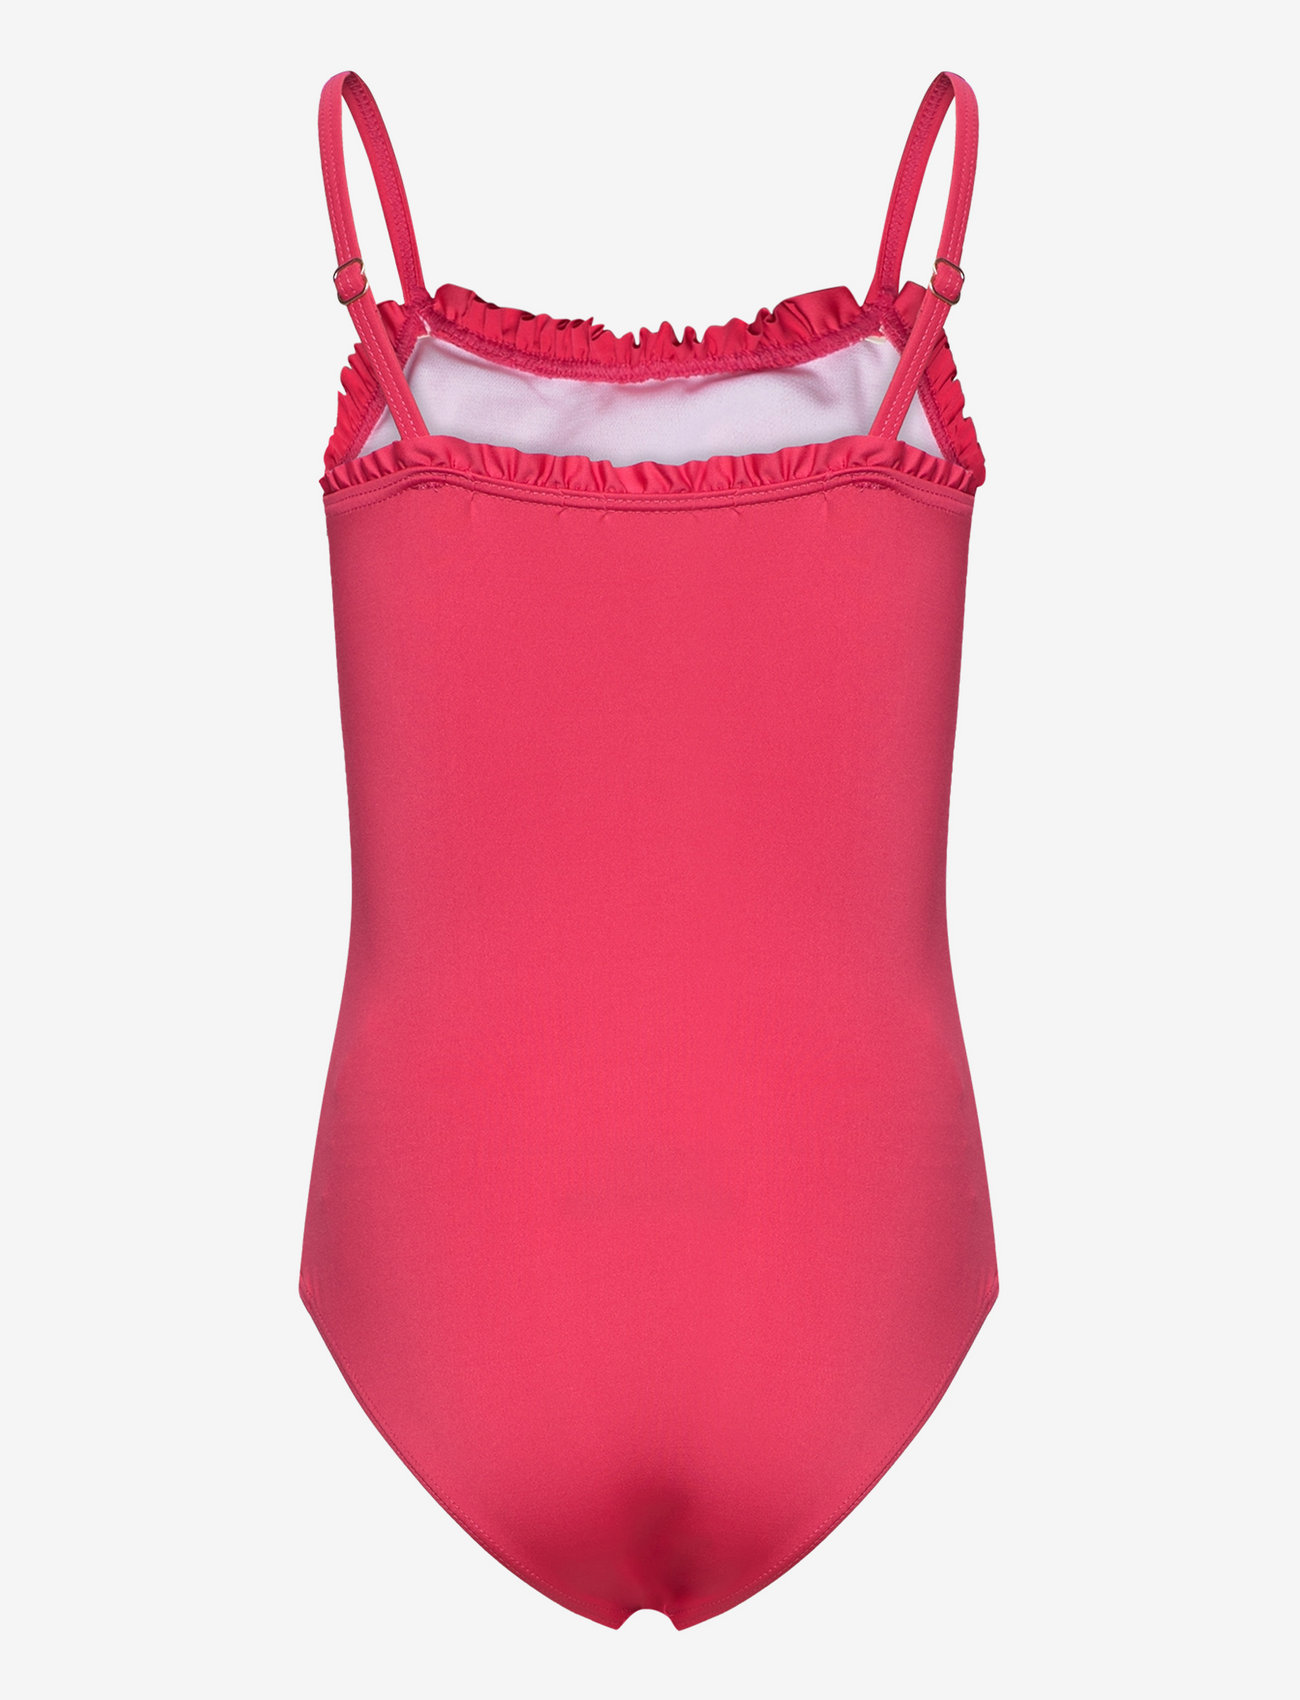 Sofie Schnoor Young - Swimsuit - sommarfynd - bright pink - 1